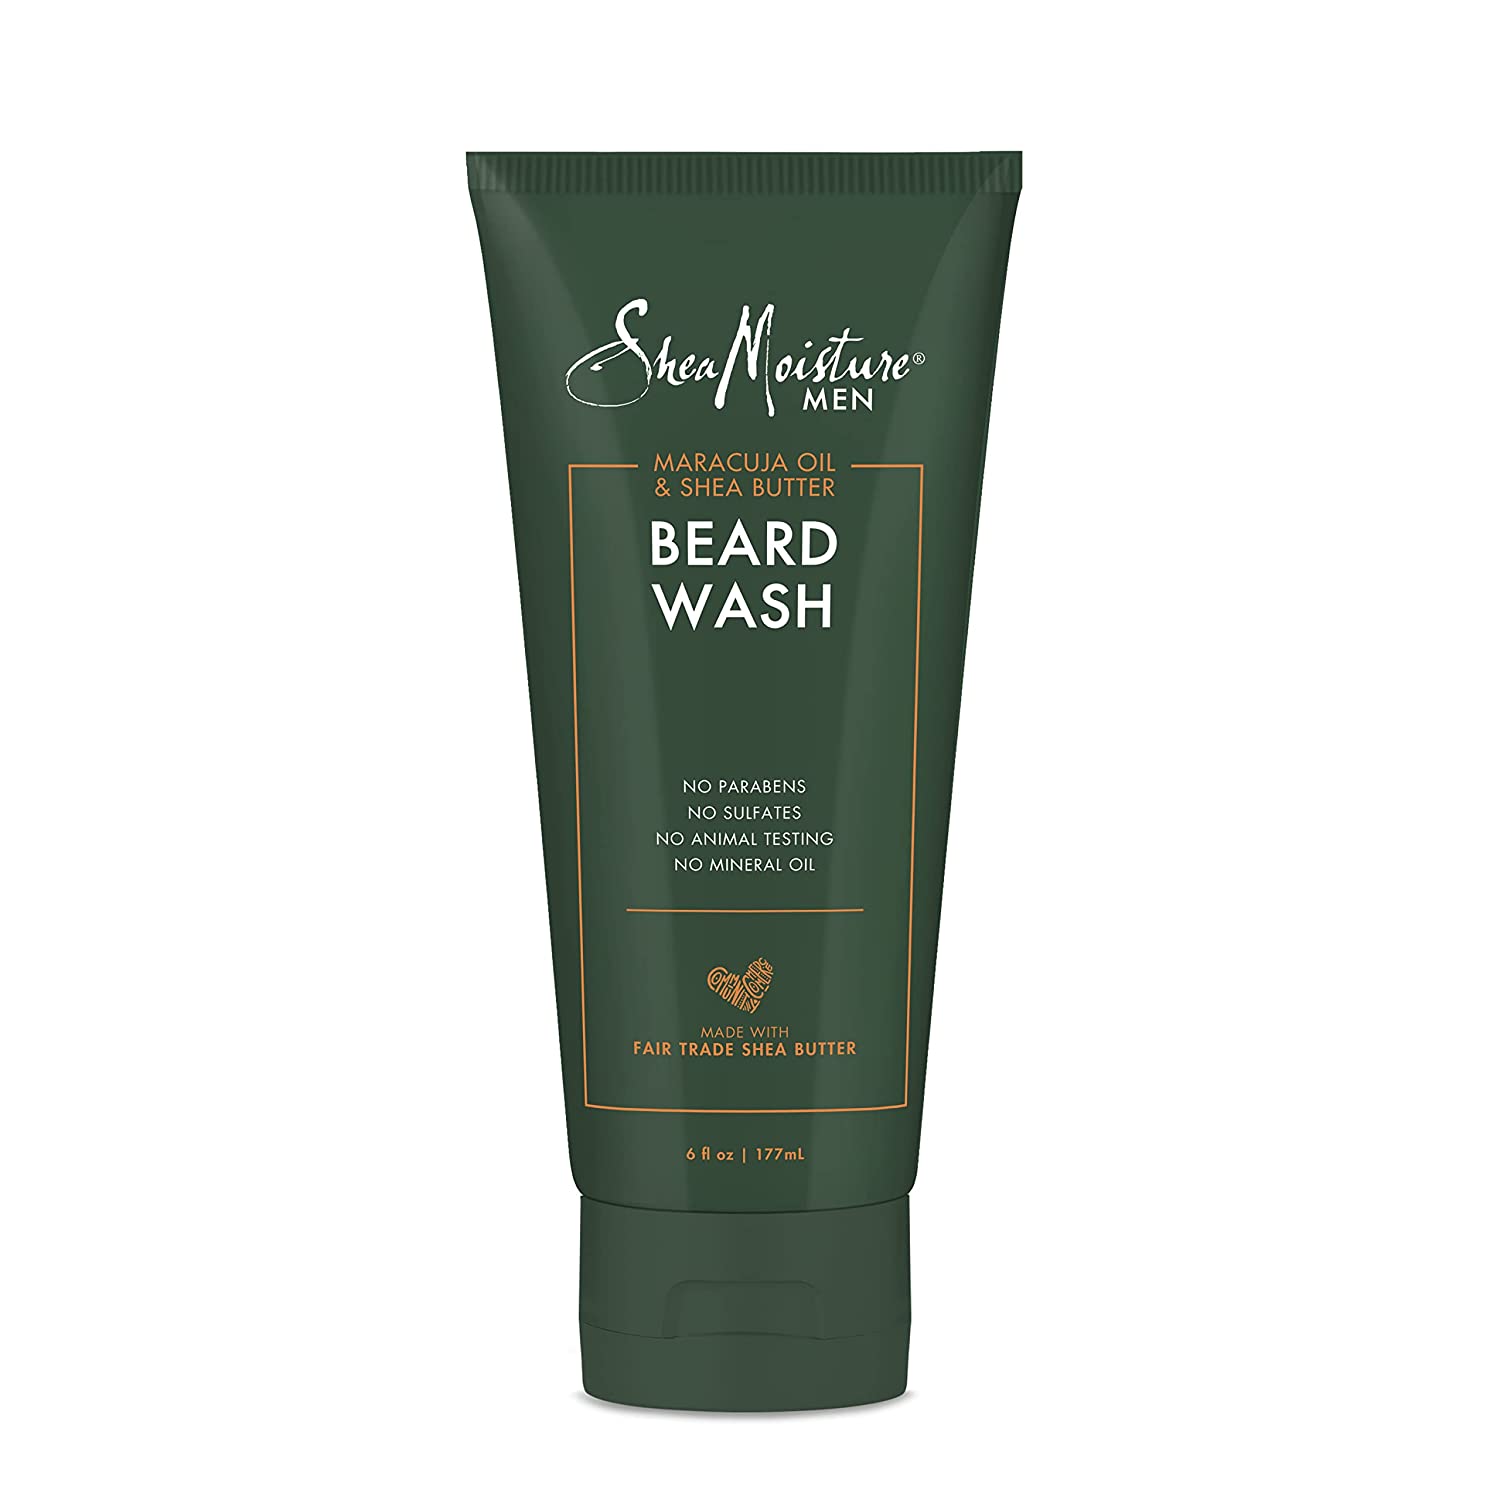 SheaMoisture Beard Wash for a Full Beard Maracuja Oil & Shea Butter to Deep Clean and Refresh Beards 6 oz Find Your New Look Today!